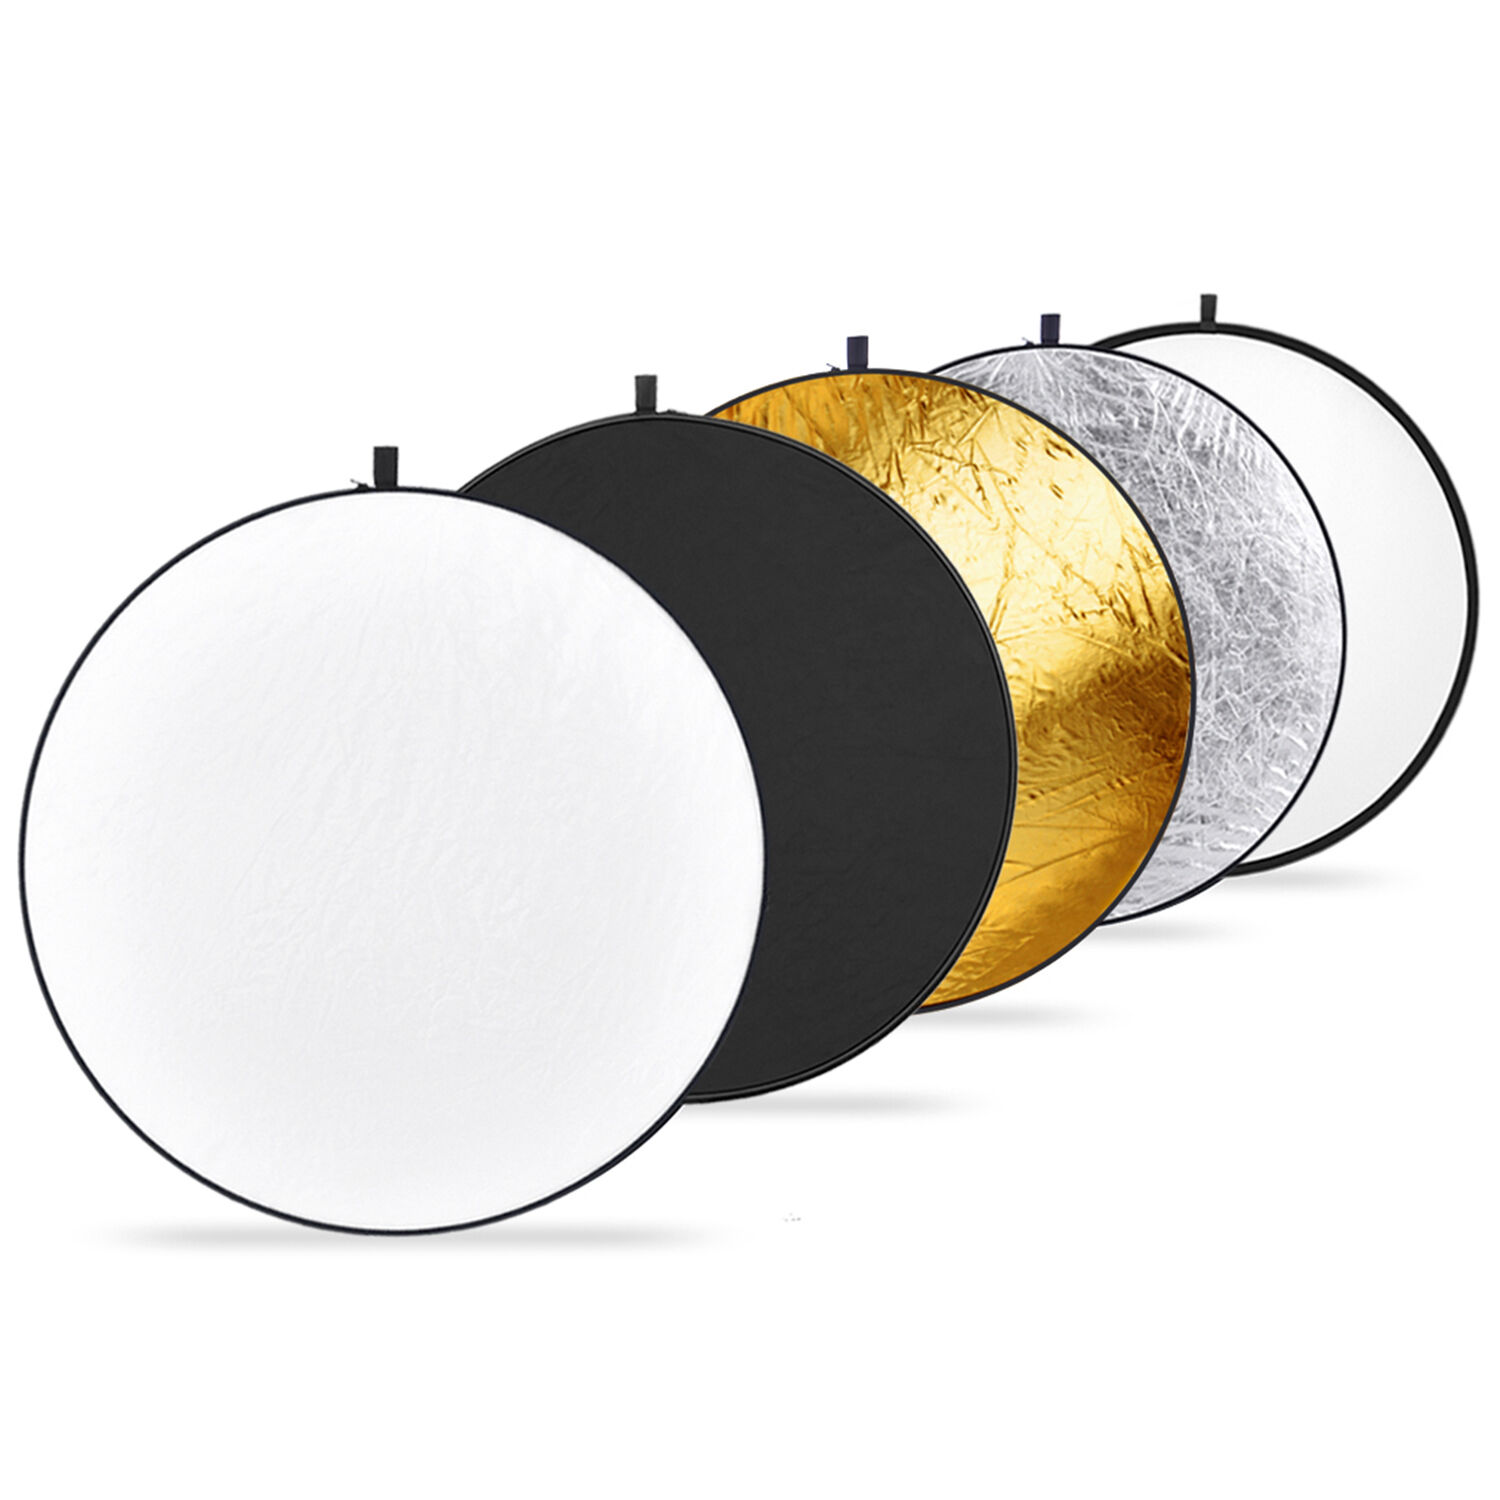 Neewer 22" 5-in-1 Photography Studio Multi-disc Collapsible Light Reflector